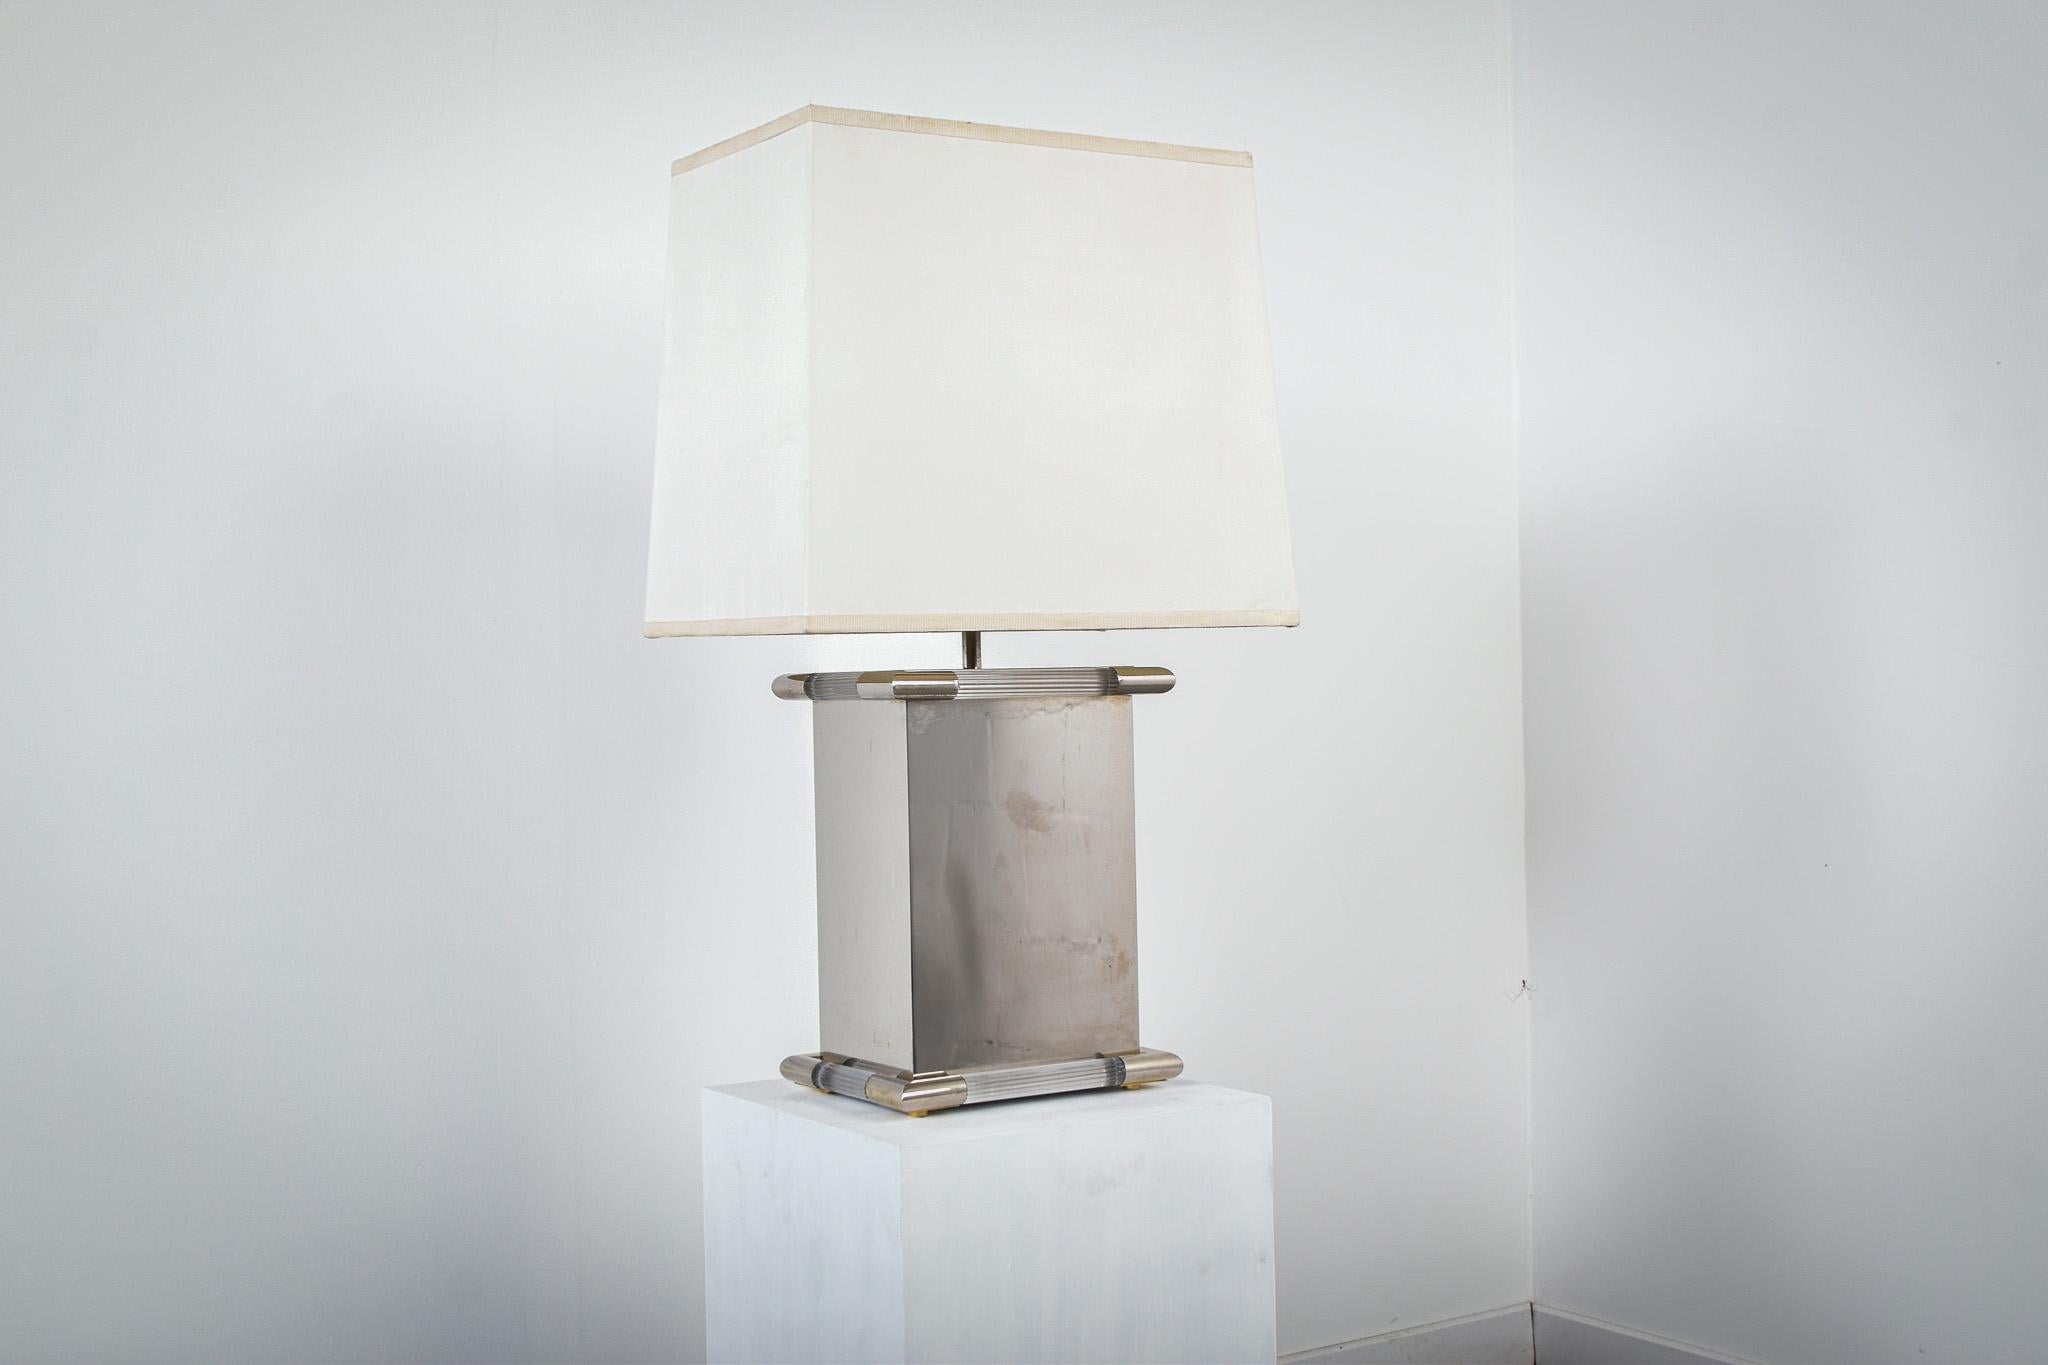 Table lamp made from polished steel and lucite by Tomasso Barbi

The lamp is signed 'Tomasso Barbi' on the underside of the lamp

Made in Italy in the 1980's